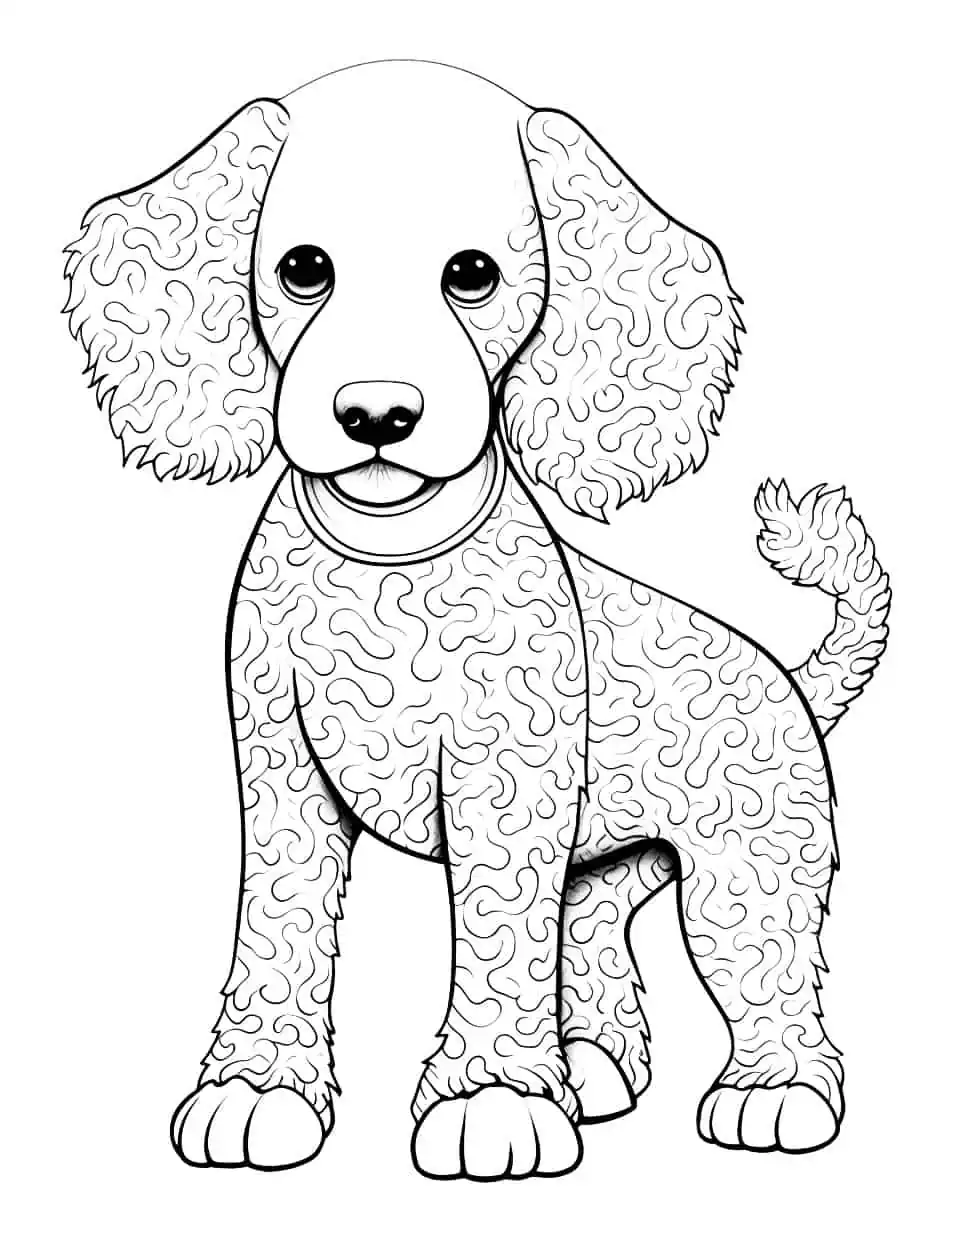 Full Page Poodle Drawing Dog Coloring - A full-page, intricate Poodle drawing for an advanced coloring page.